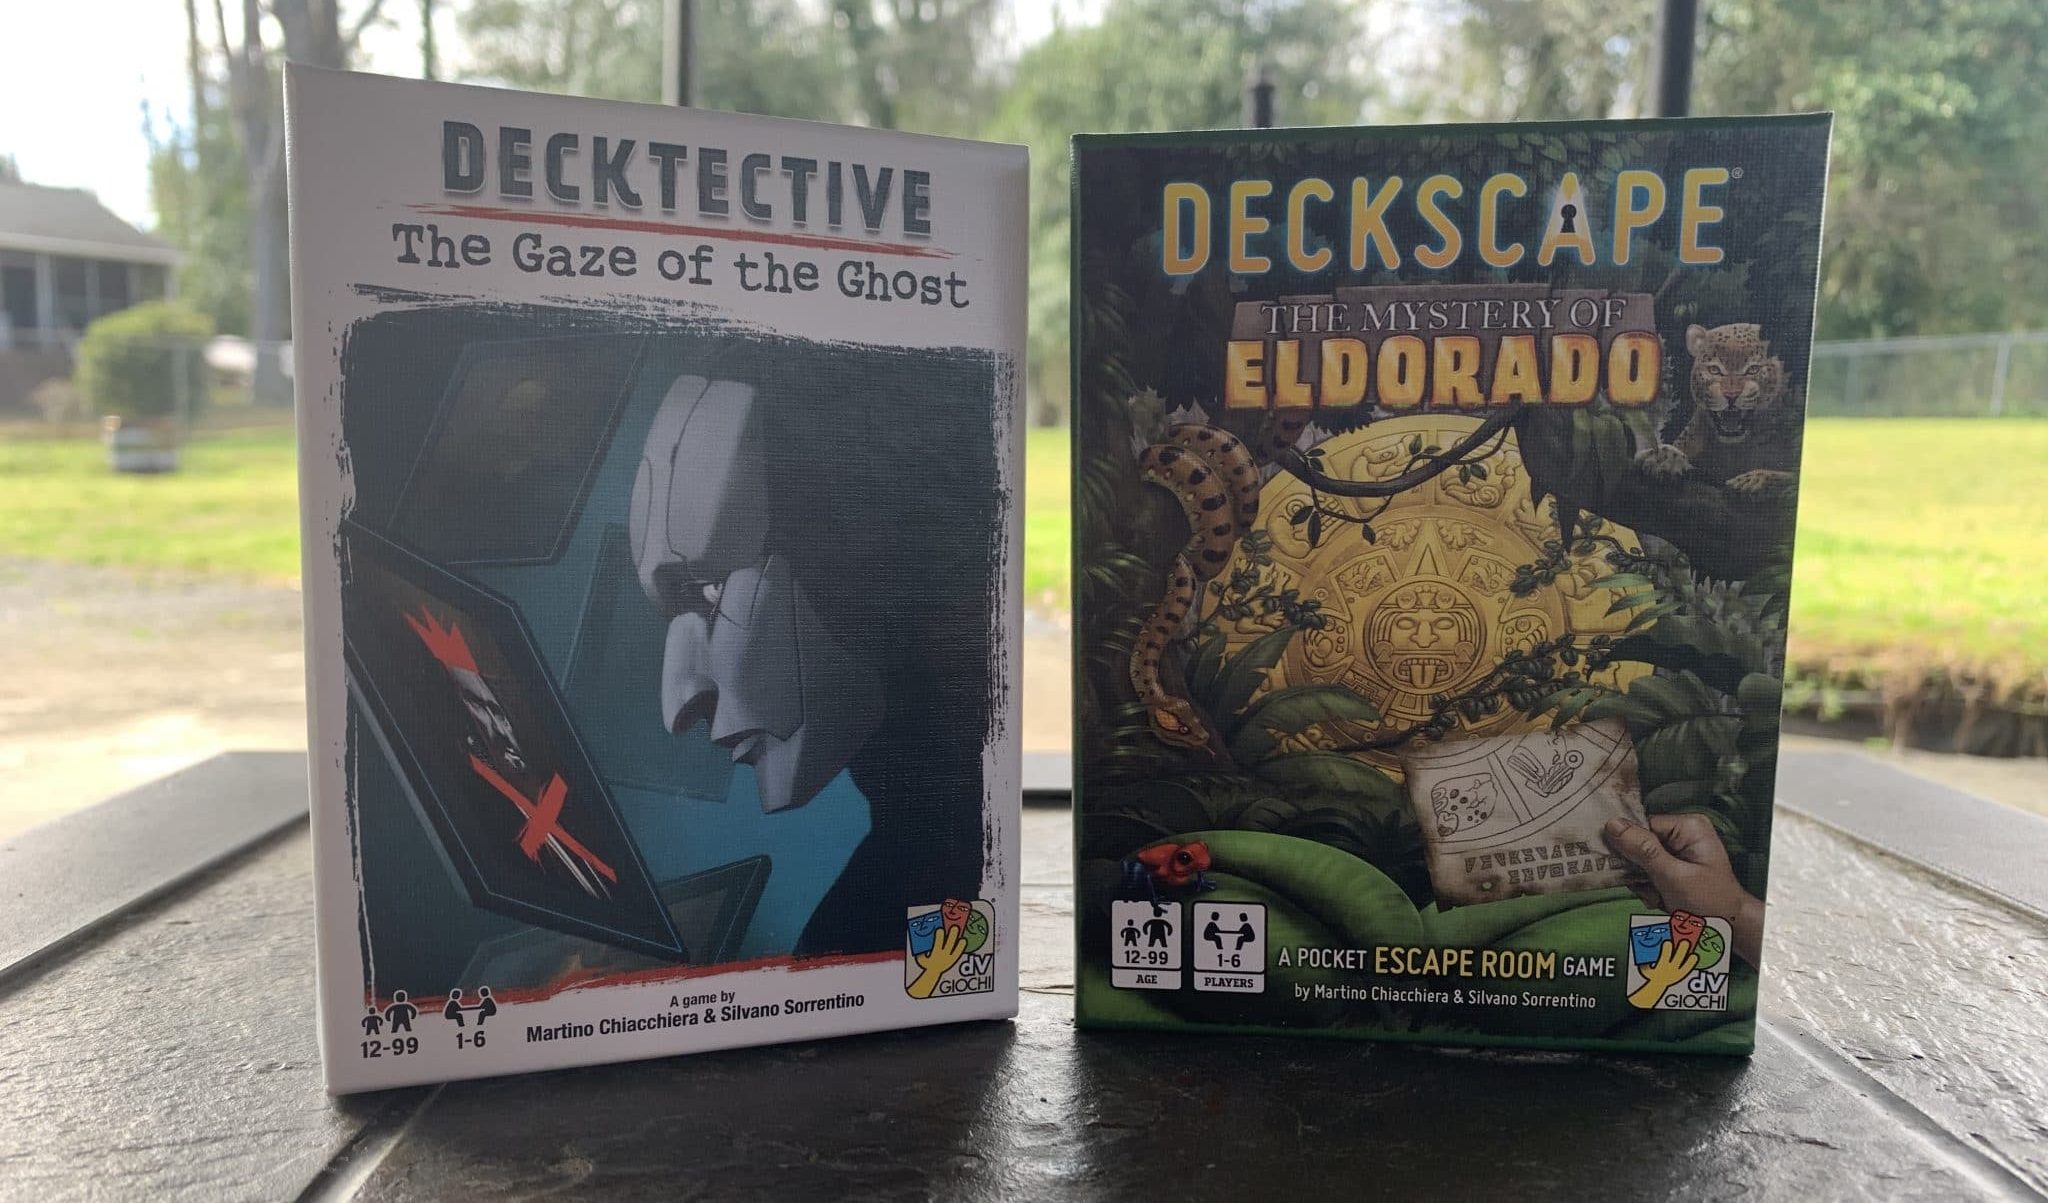 decktective and deckscape box covers